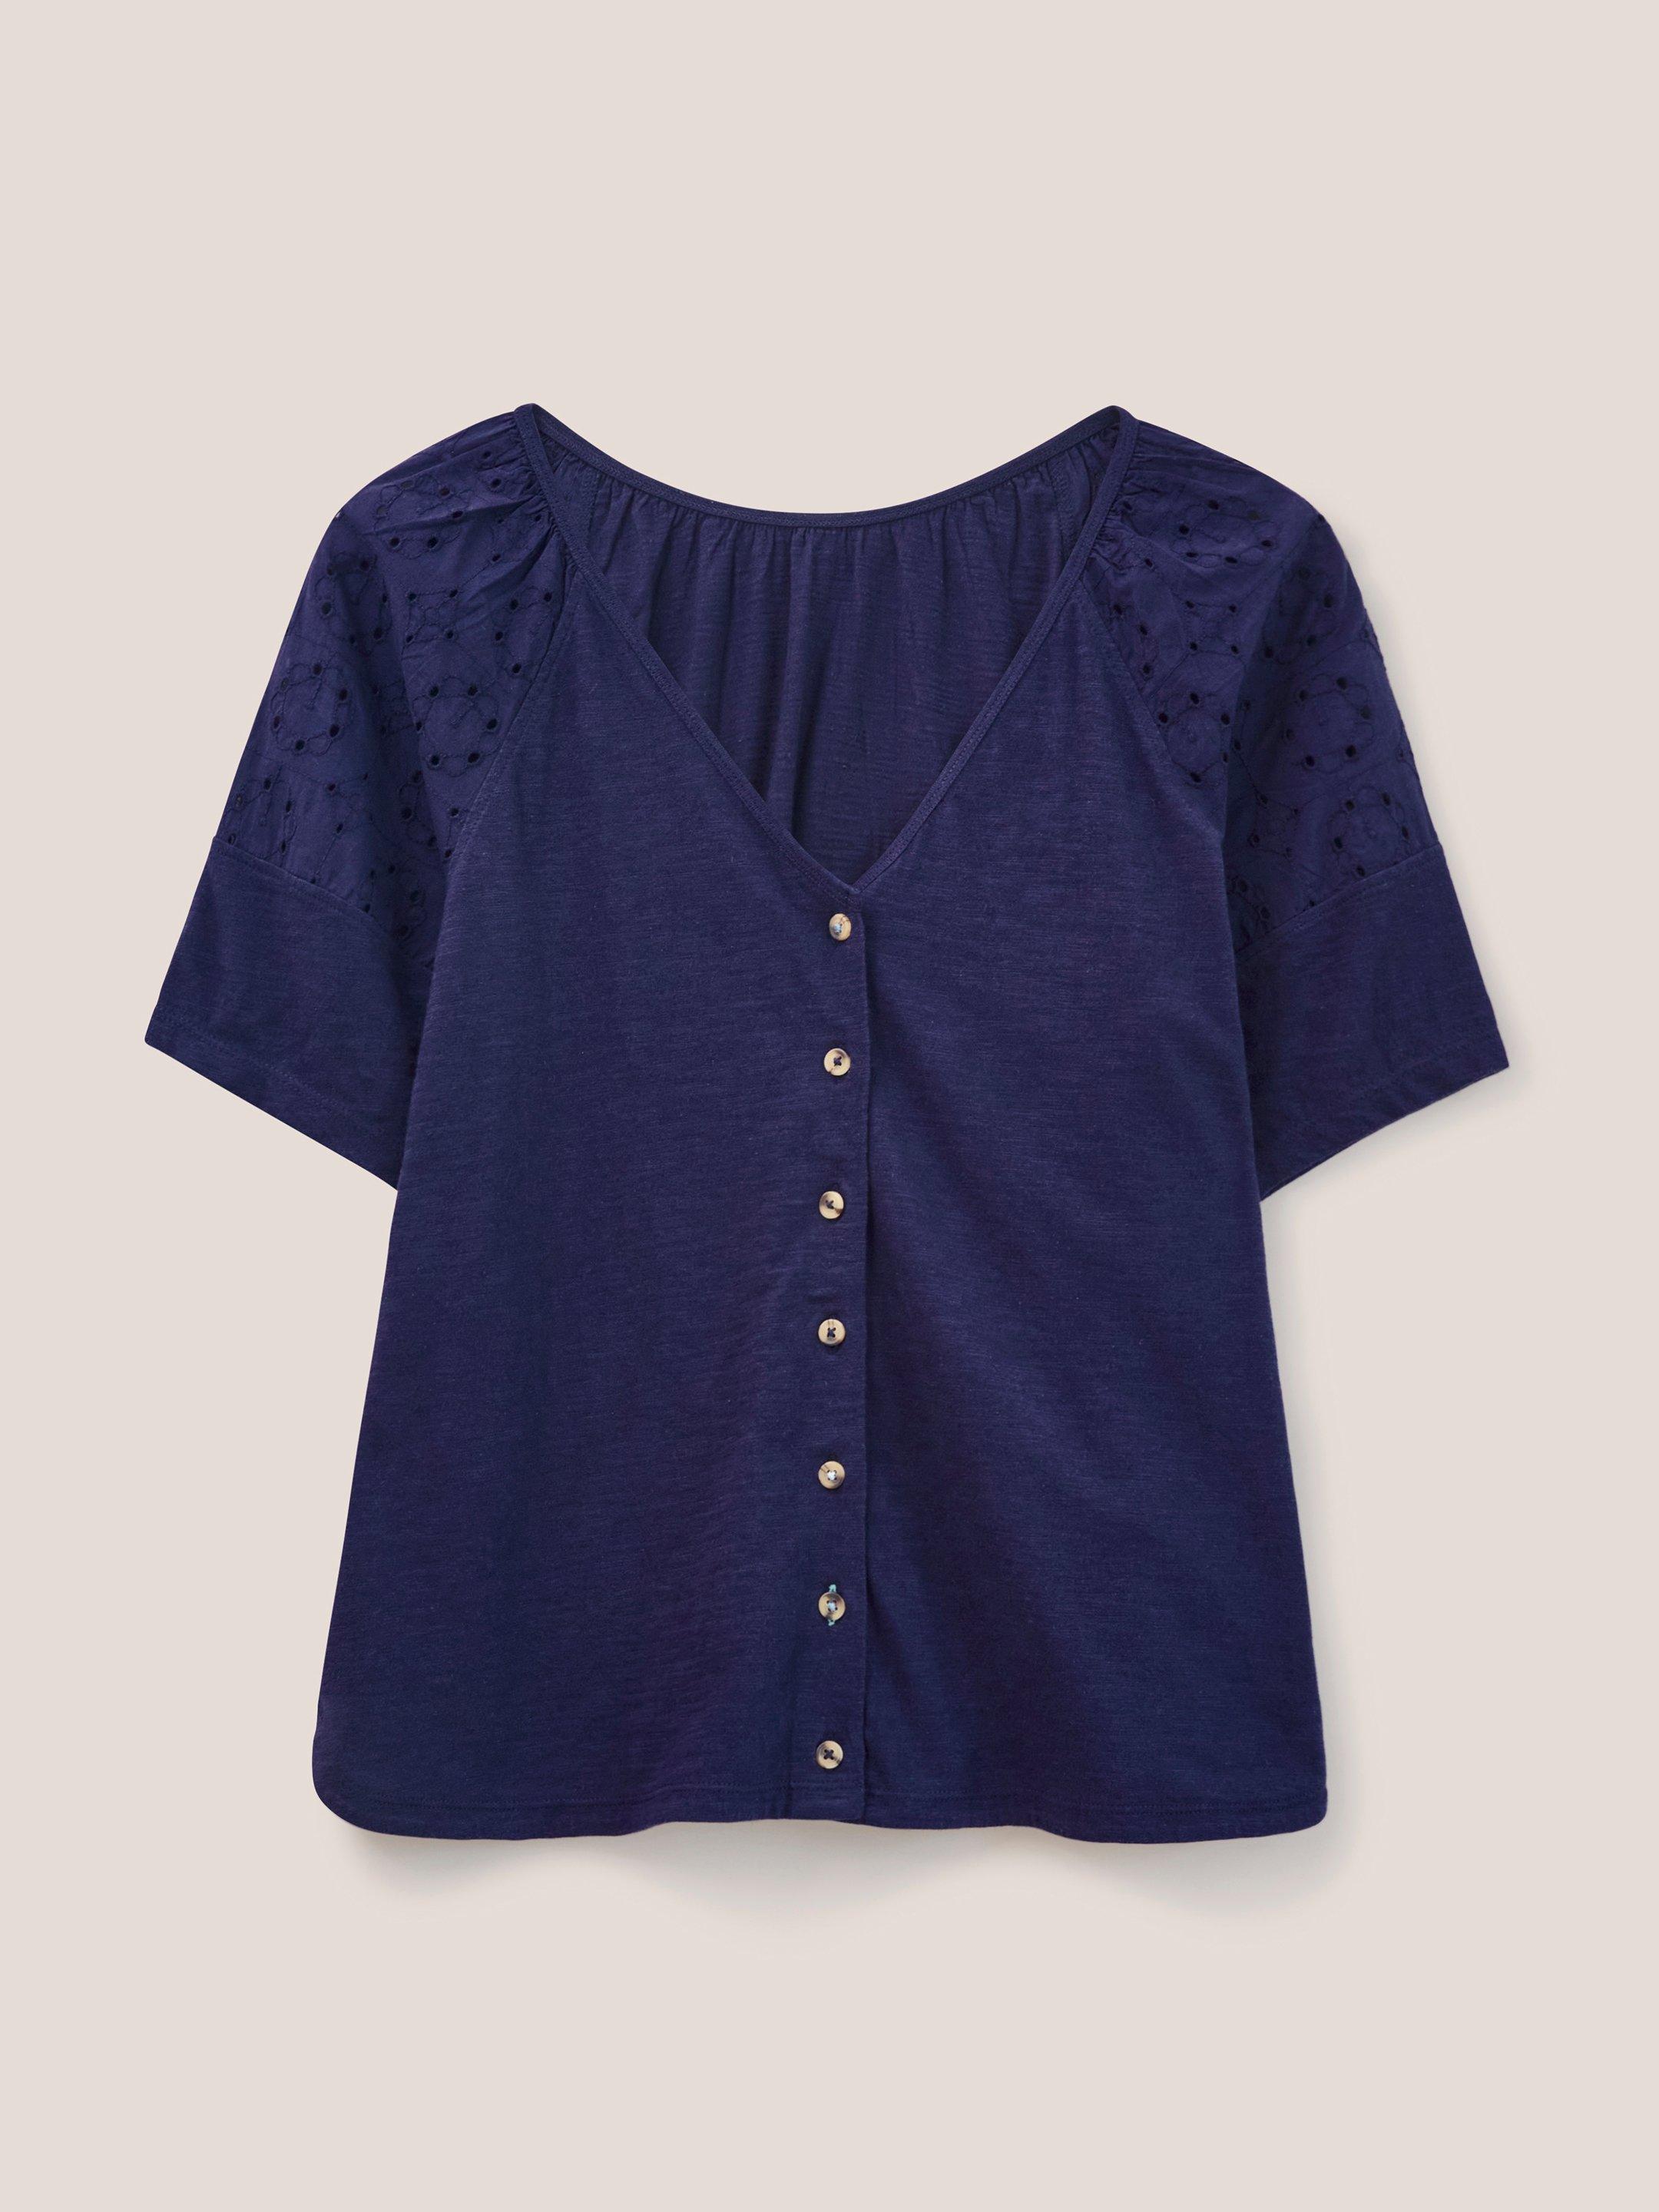 BRODERIE MIX TWO WAY TOP in FR NAVY - FLAT FRONT